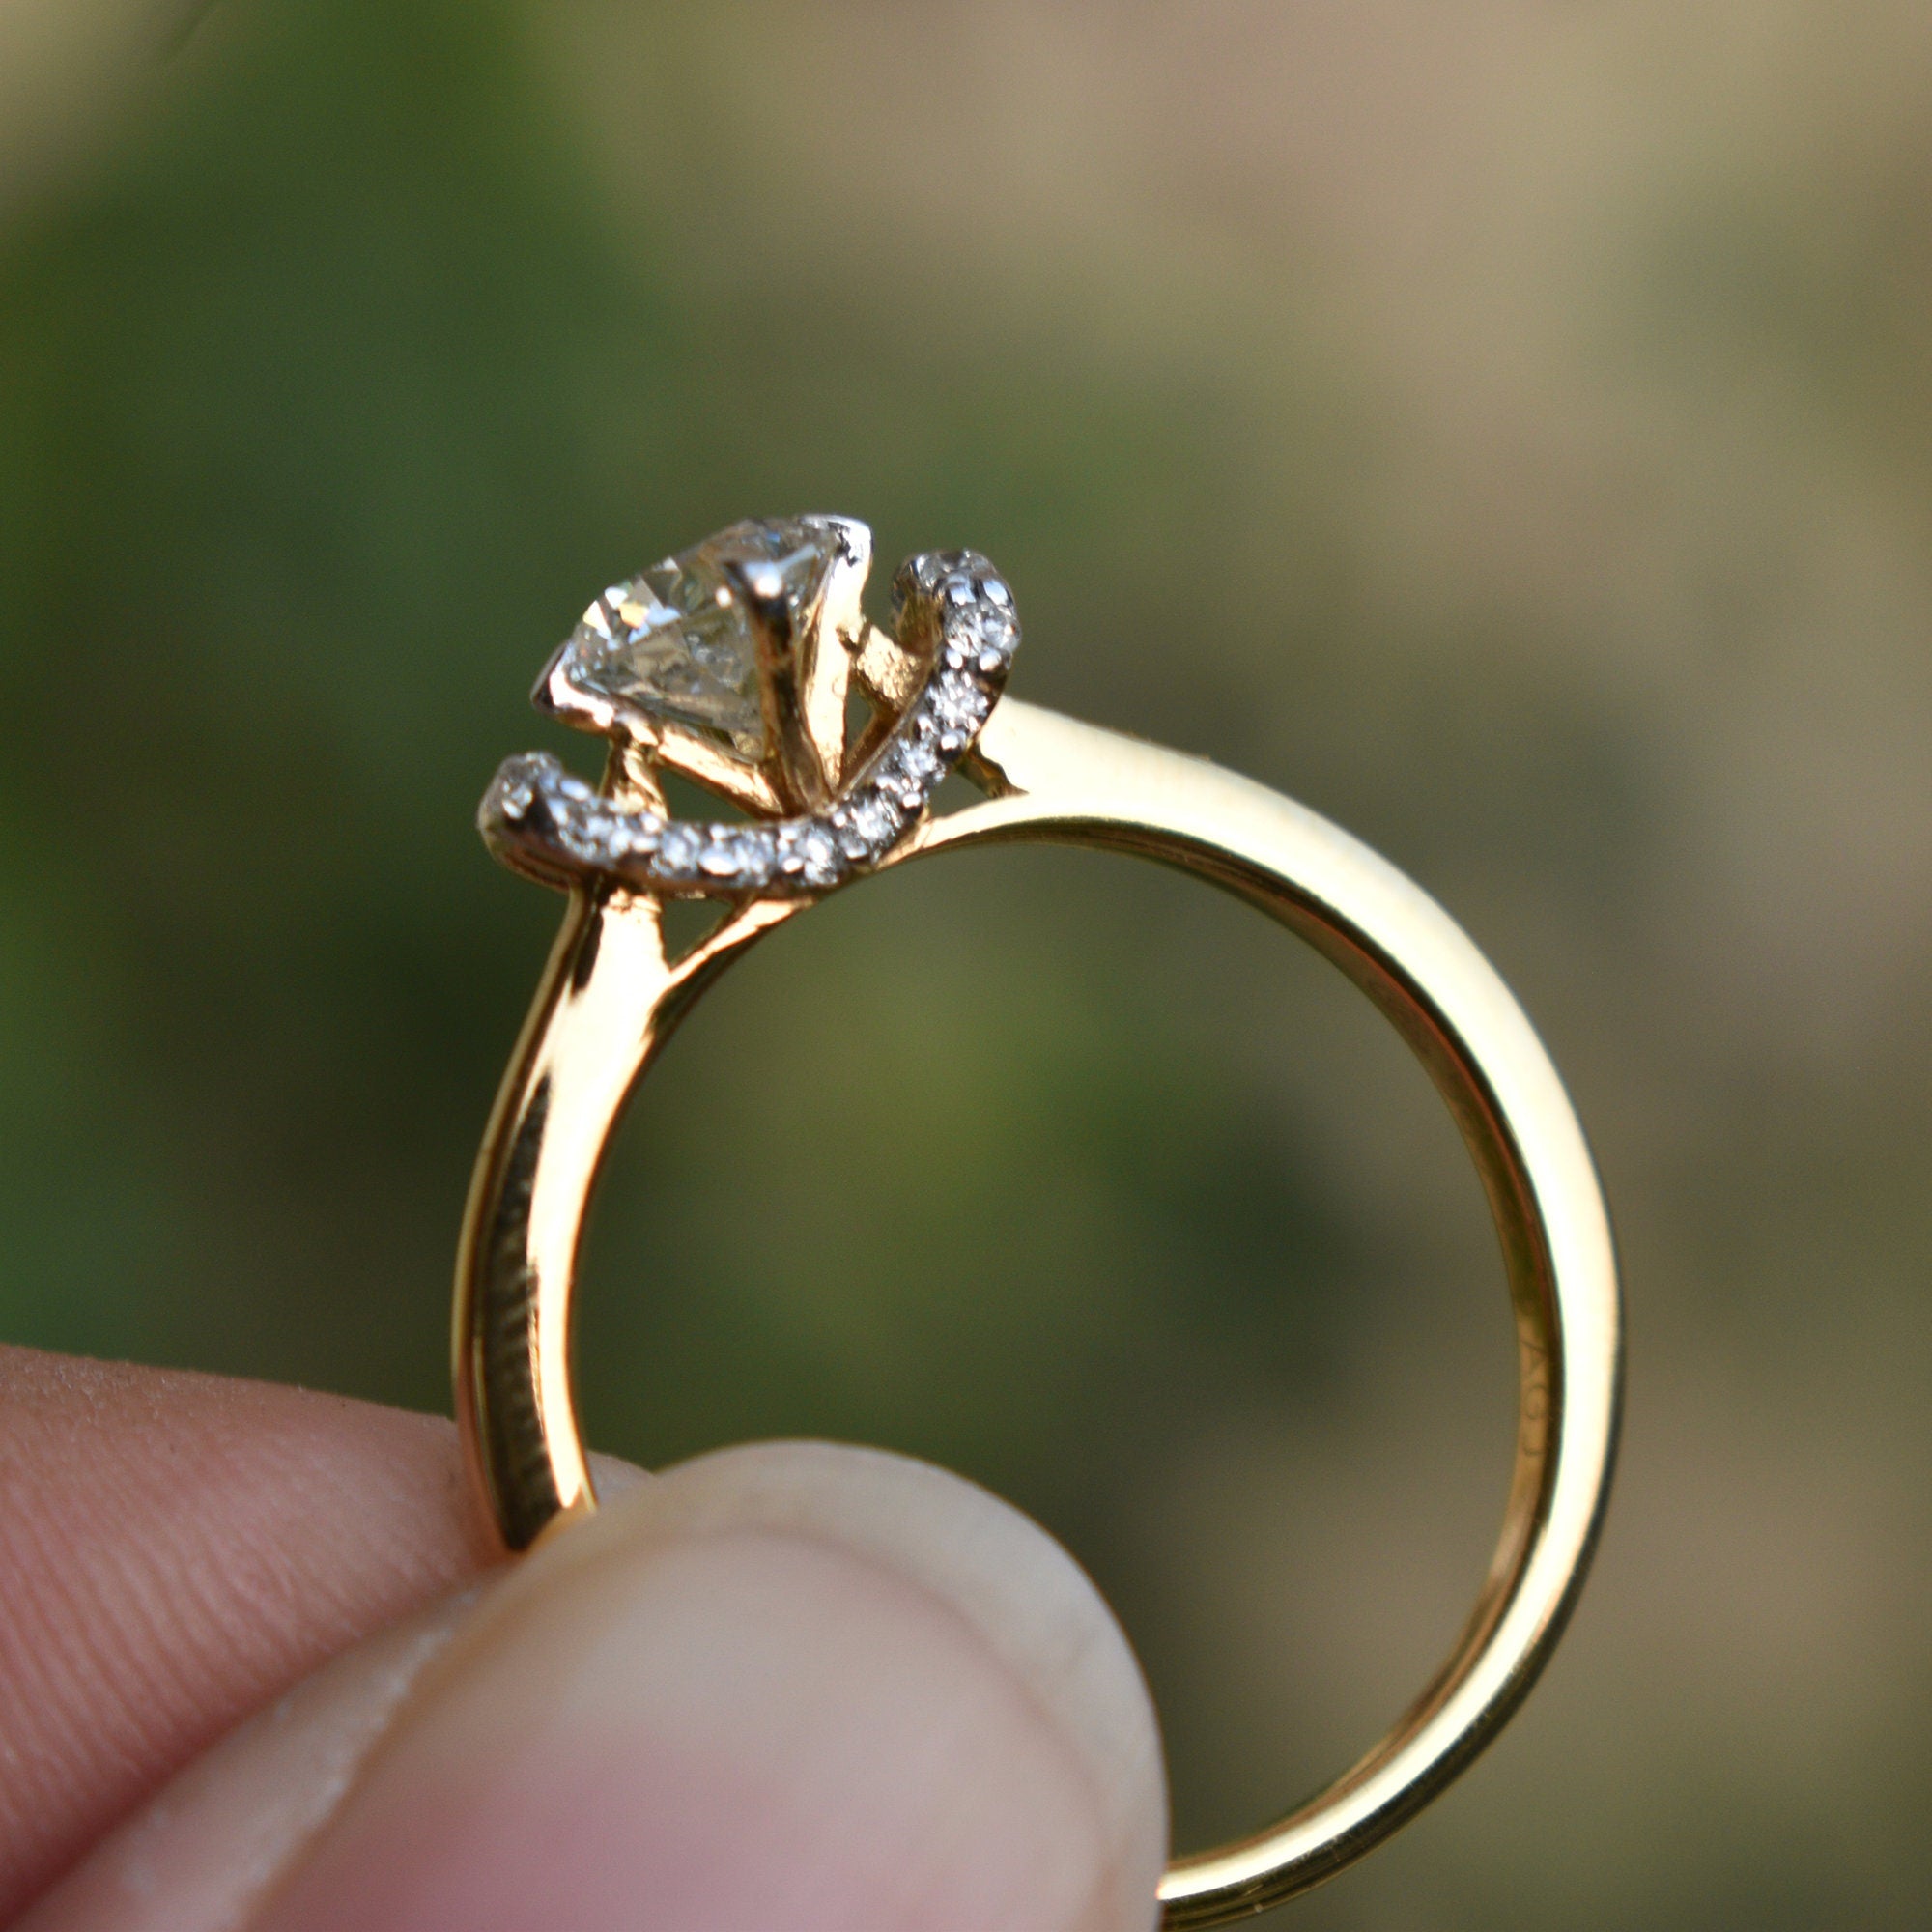 5mm Round Moissanite & Diamond Engagement Ring, 14k Solid Gold Half Carat Solitaire Ring, Unique Proposal Ring